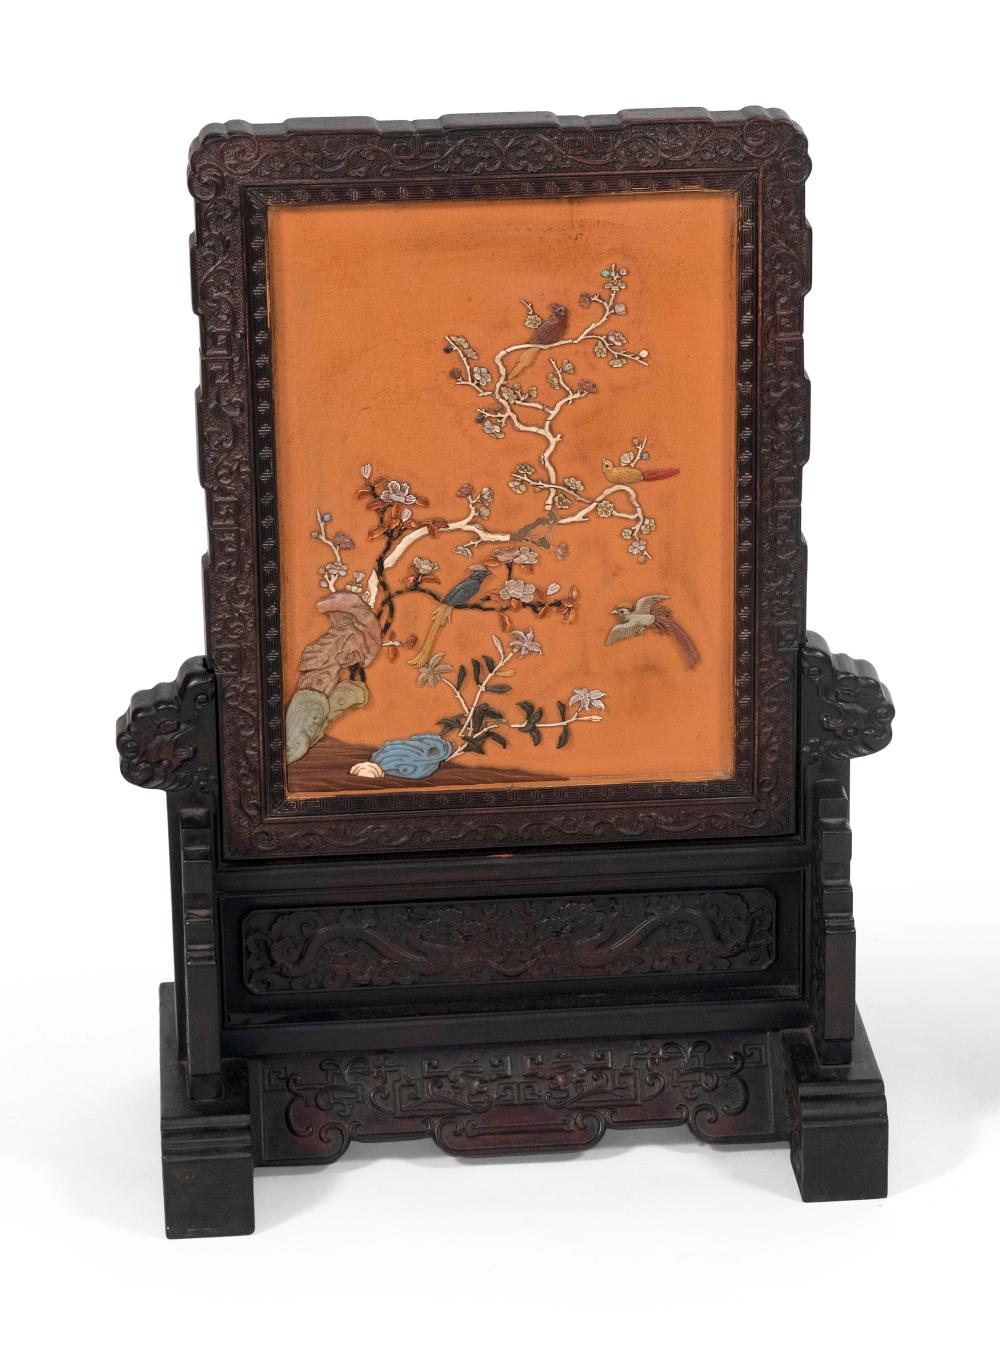 CHINESE CARVED WOOD TABLE SCREEN